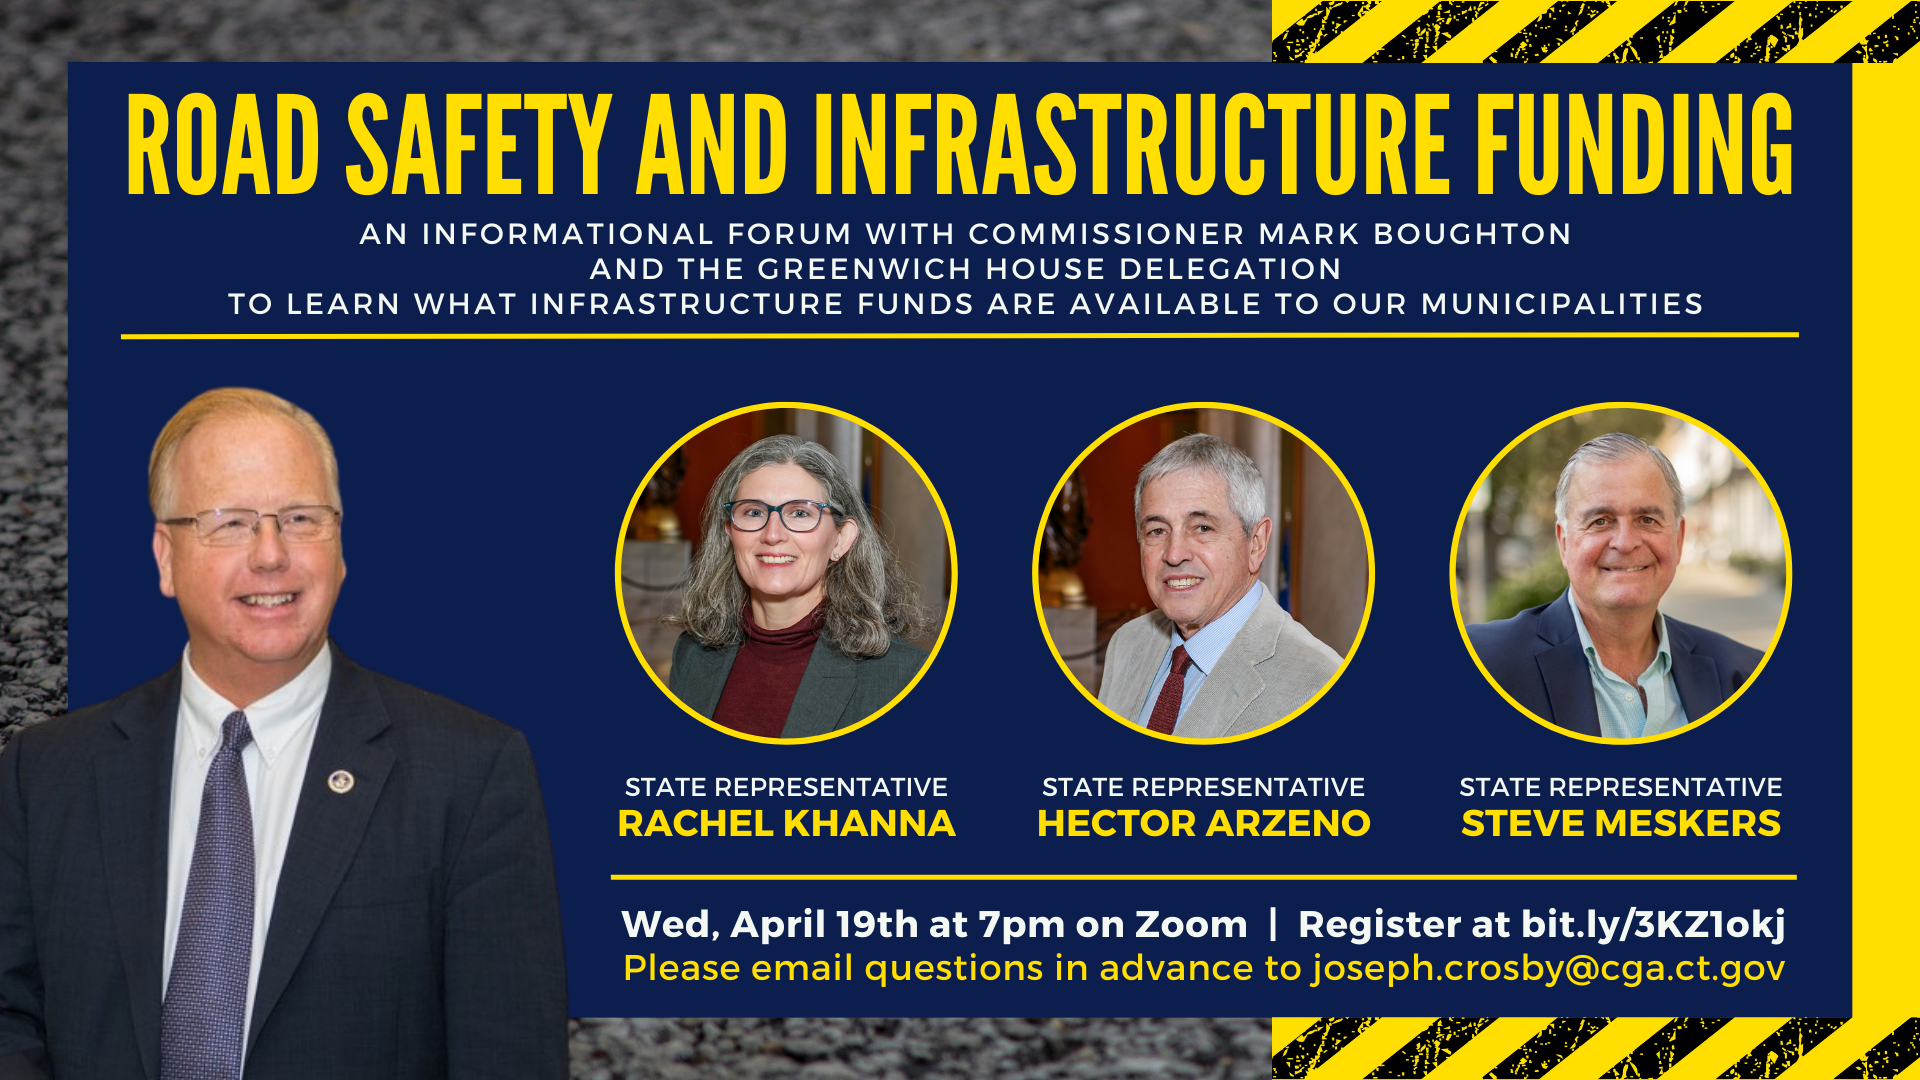 Road Safety and Infrastructure Informational Forum